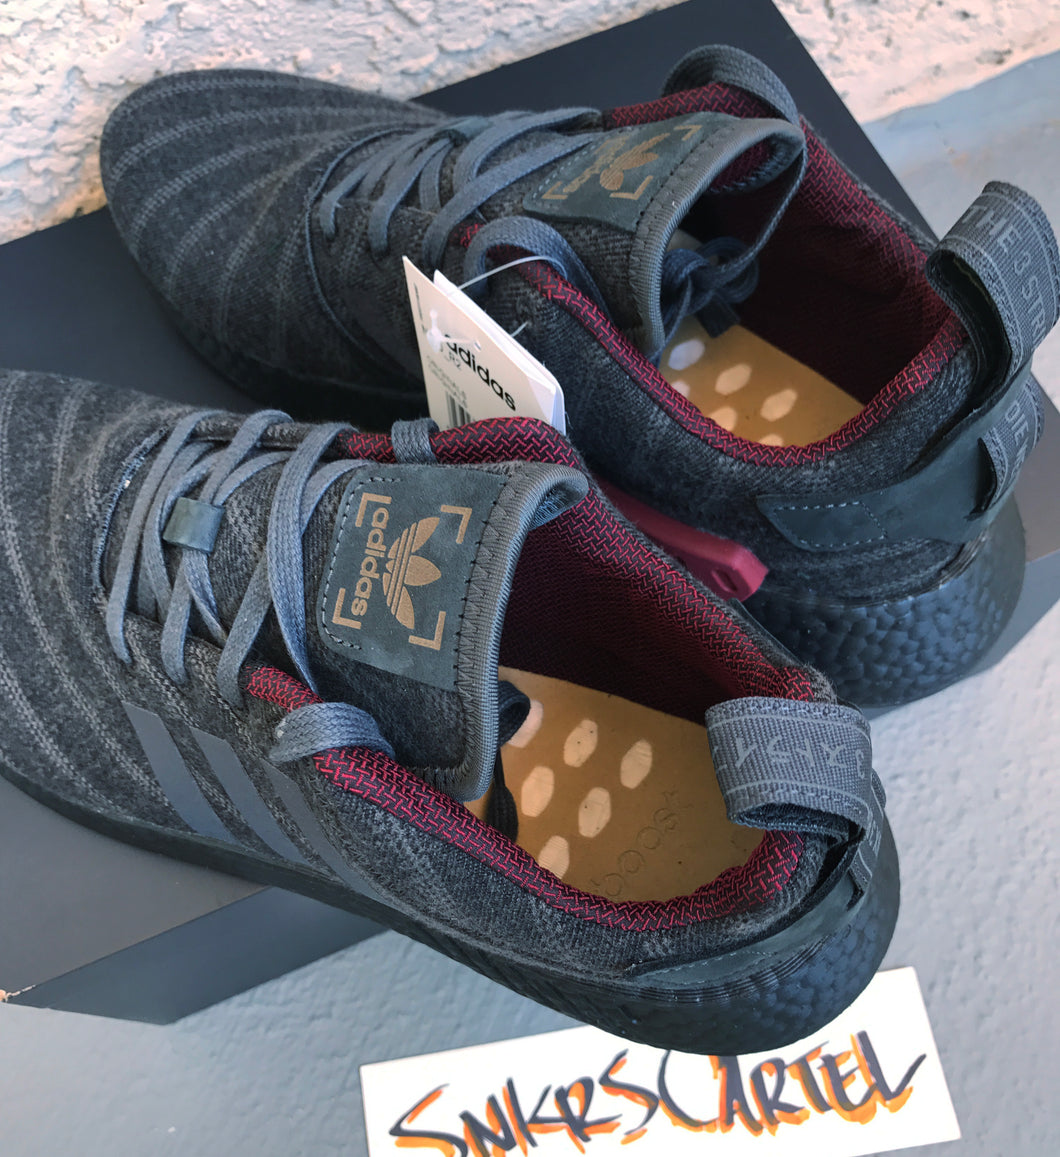 NMD R2 Exclusive Poole CQ2015 – Snkrs Cartel